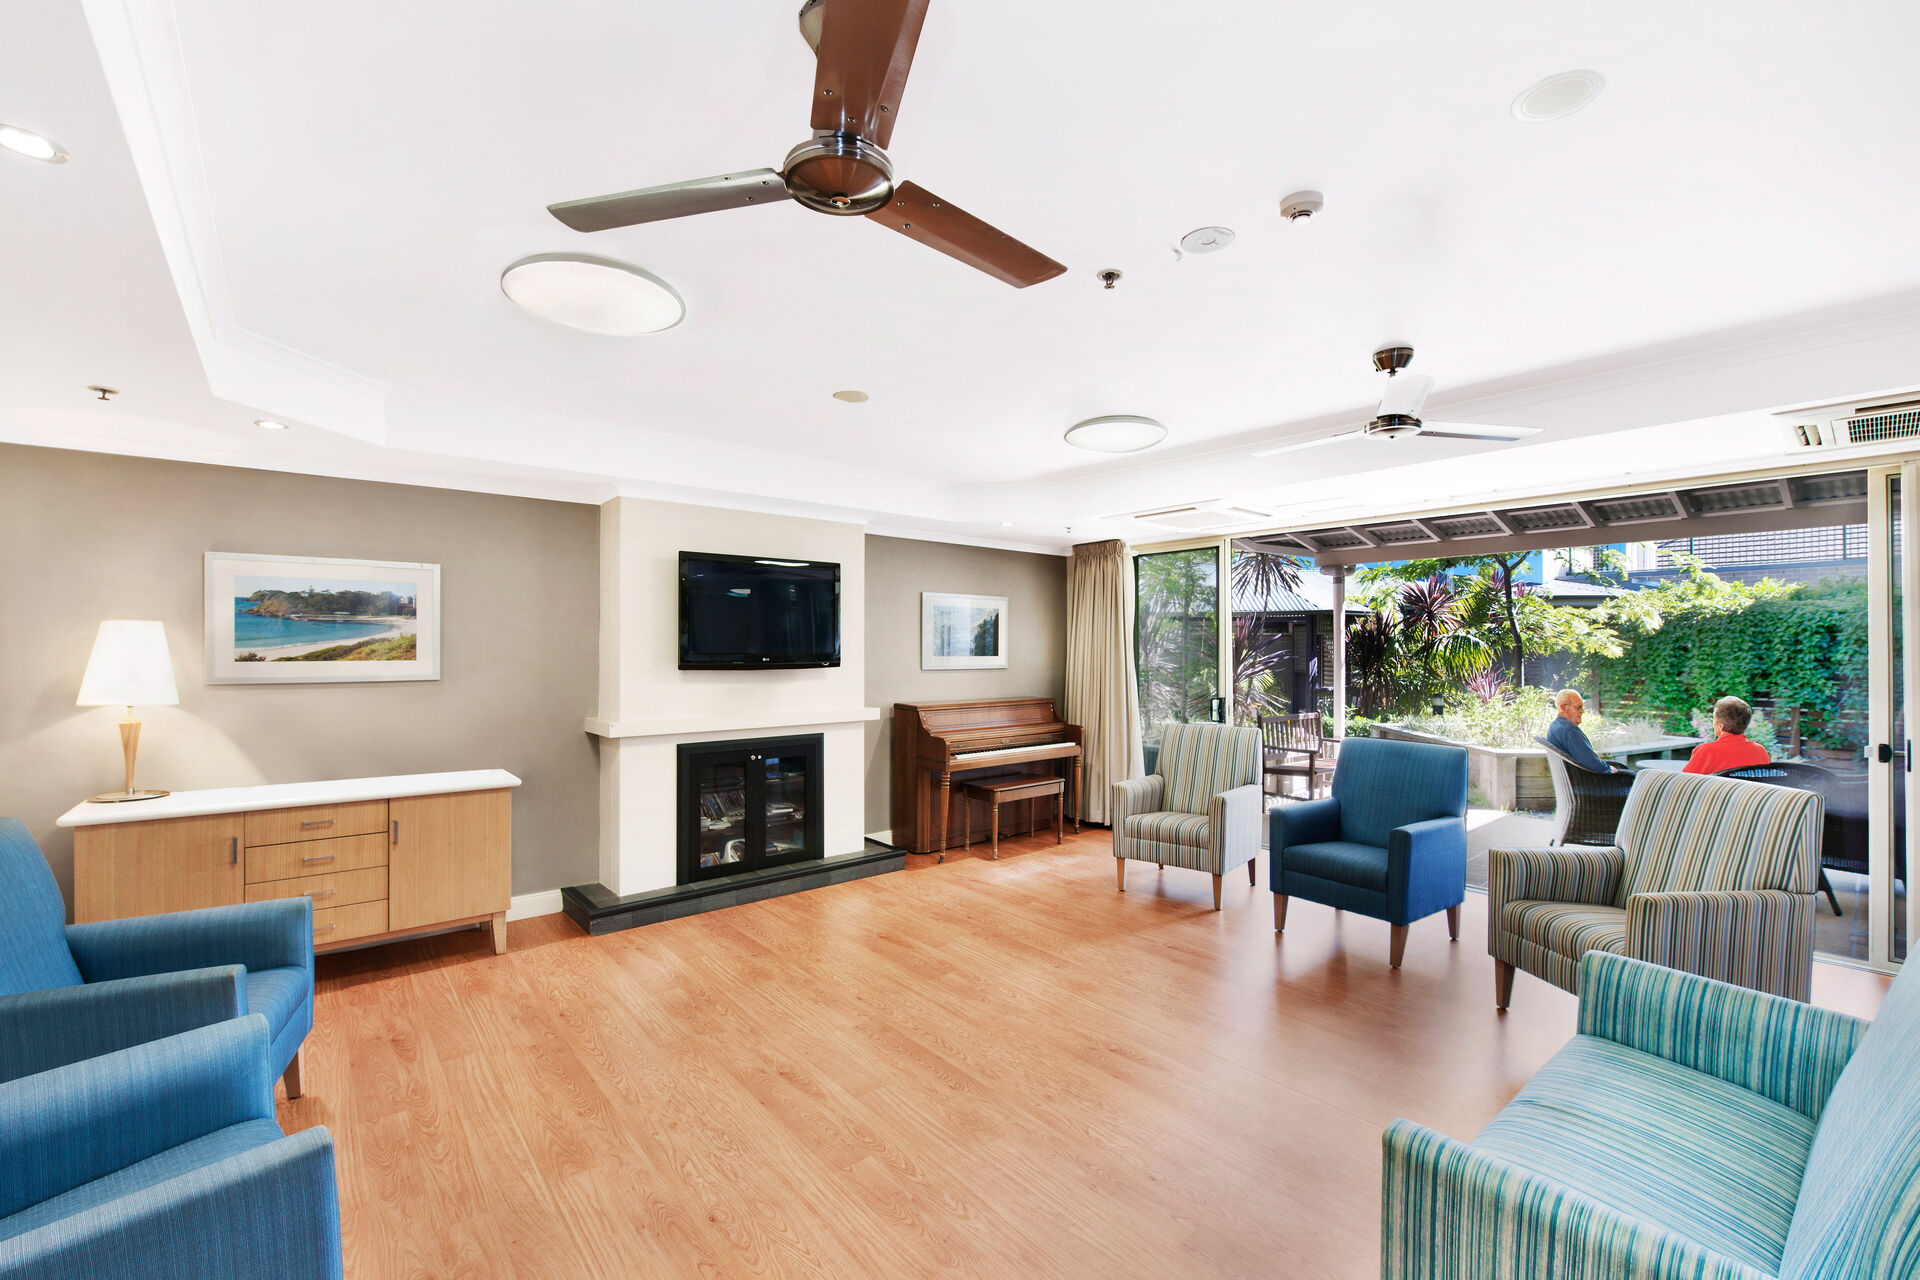 indoor spacious sitting area for aged care residents of BaptistCare Kularoo centre aged care home in forster nsw